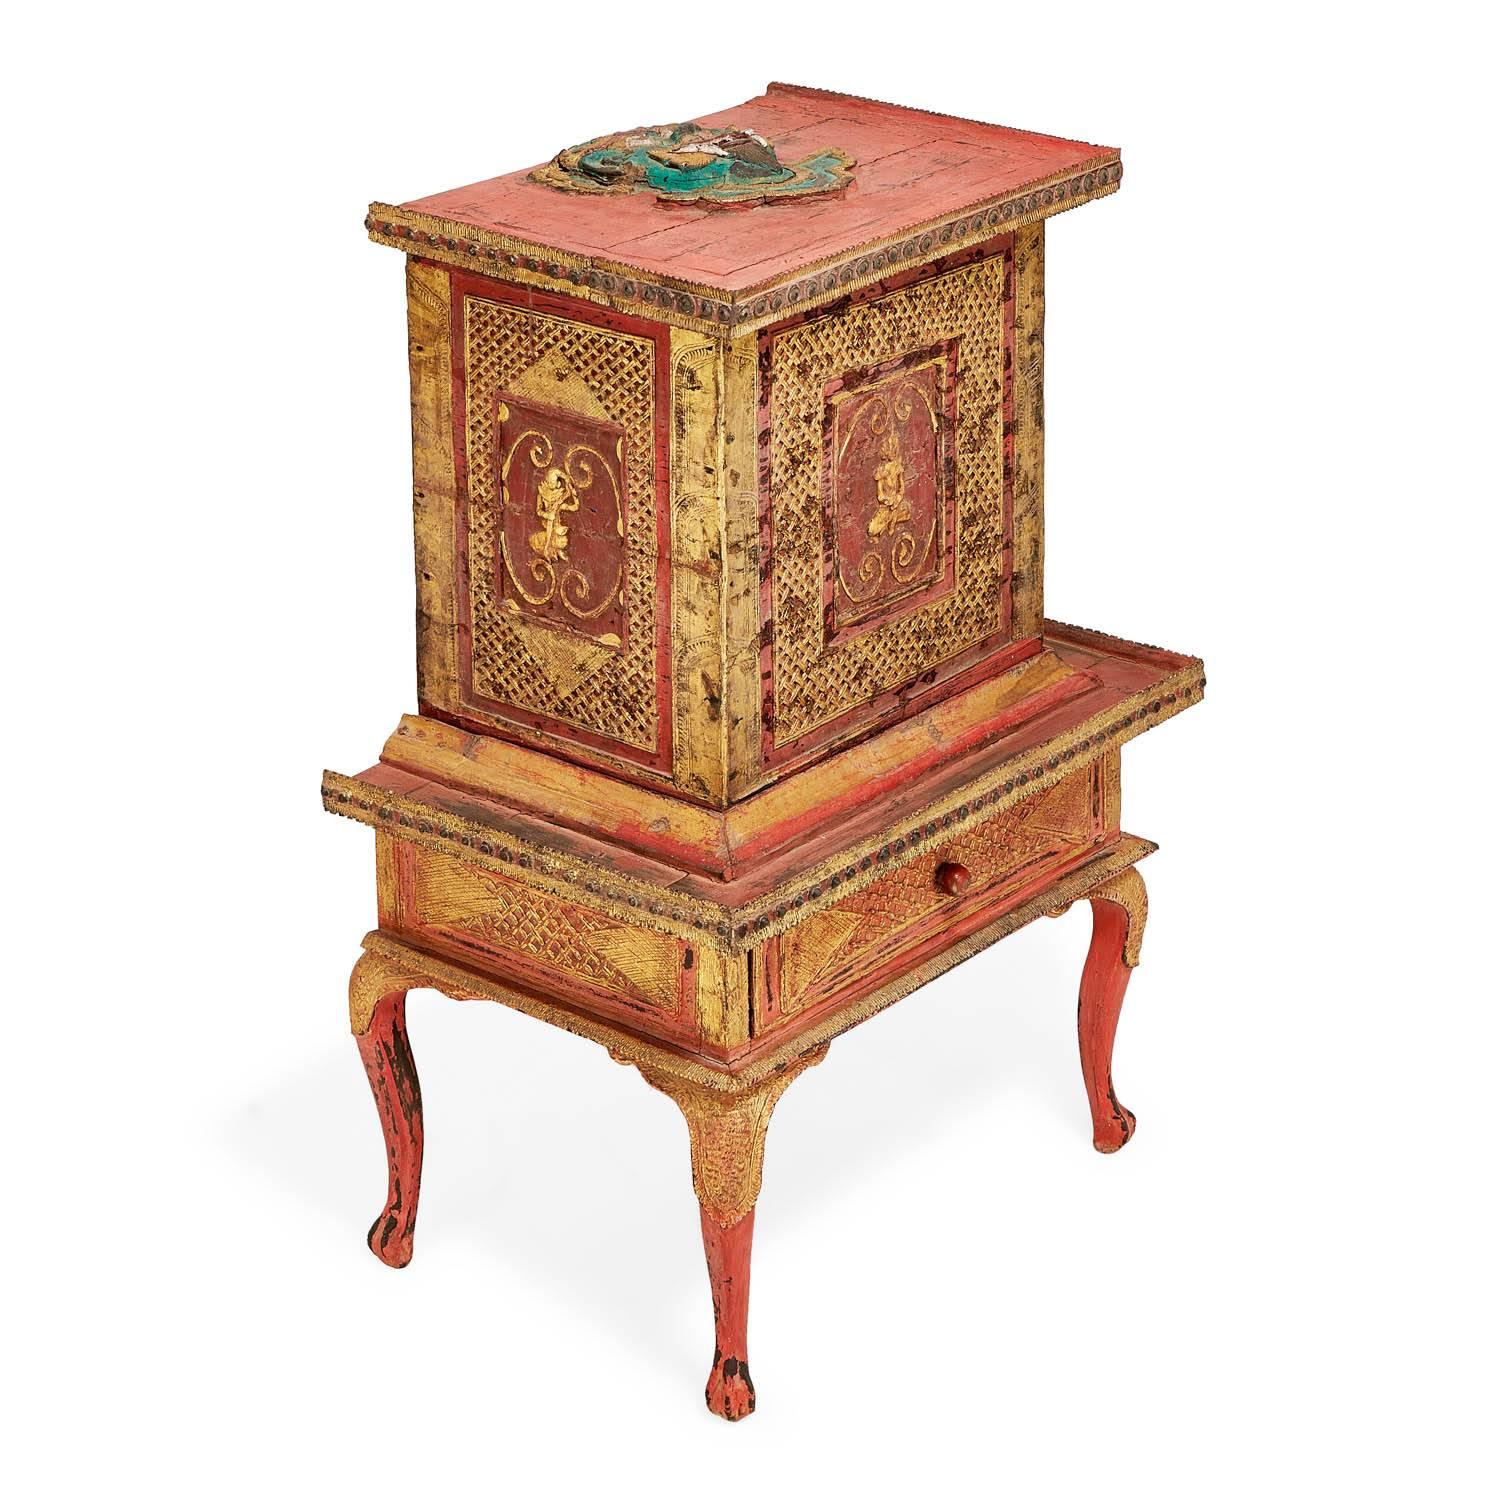 Historically used for donations in a Burmese Buddhist temple circa 1890, a hand-carved and intricately gilt and red painted donation box sits gracefully on curved cabriole legs. Designed with an opening at the top to collect offerings from visitors